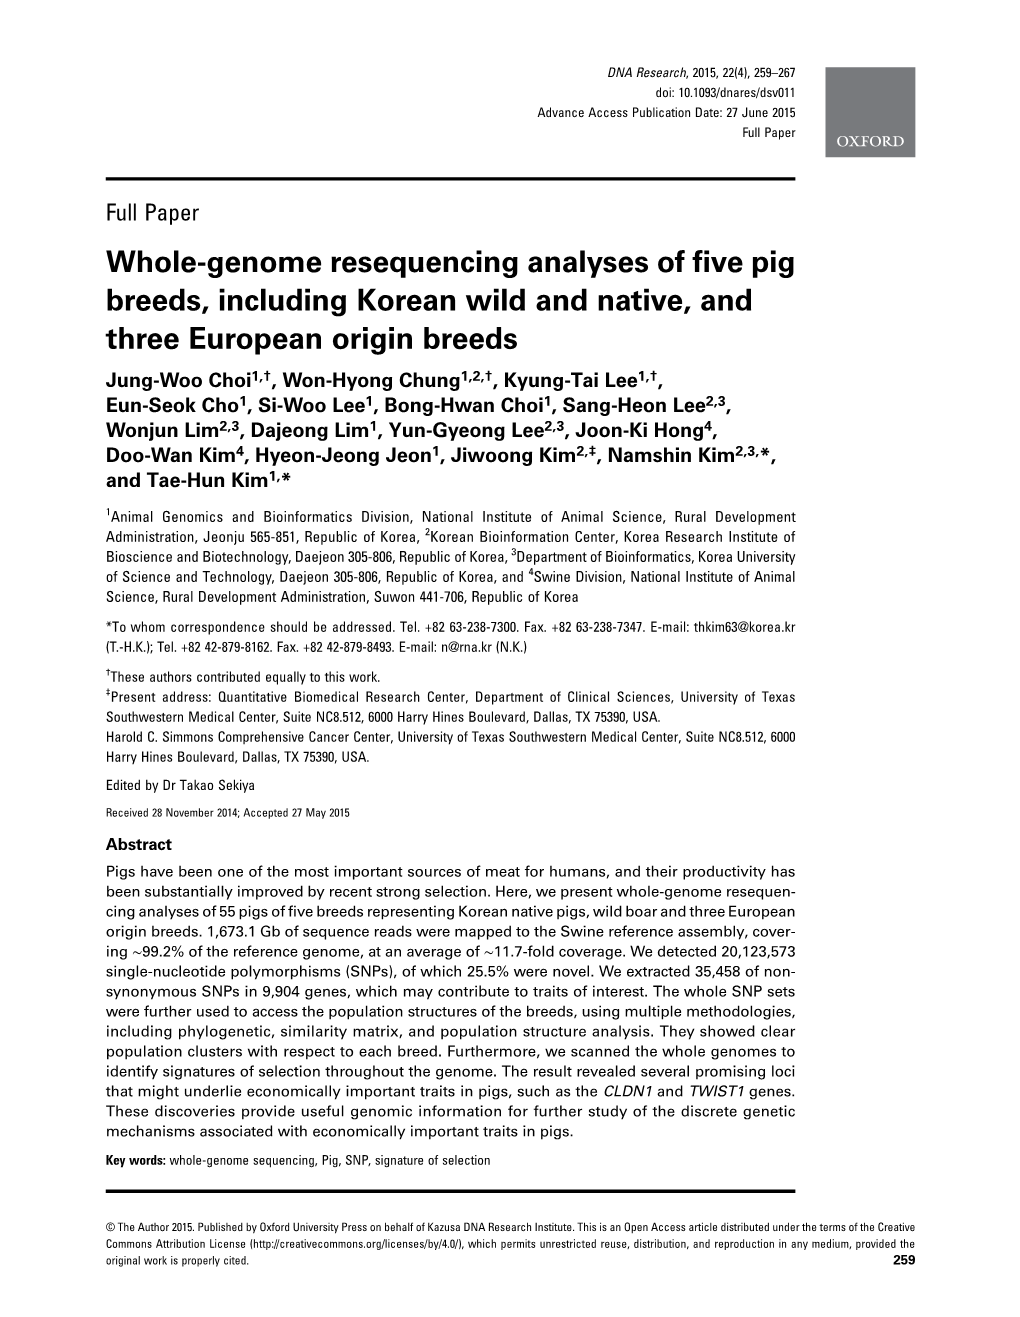 Whole-Genome Resequencing Analyses of Five Pig Breeds, Including Korean Wild and Native, and Three European Origin Breeds